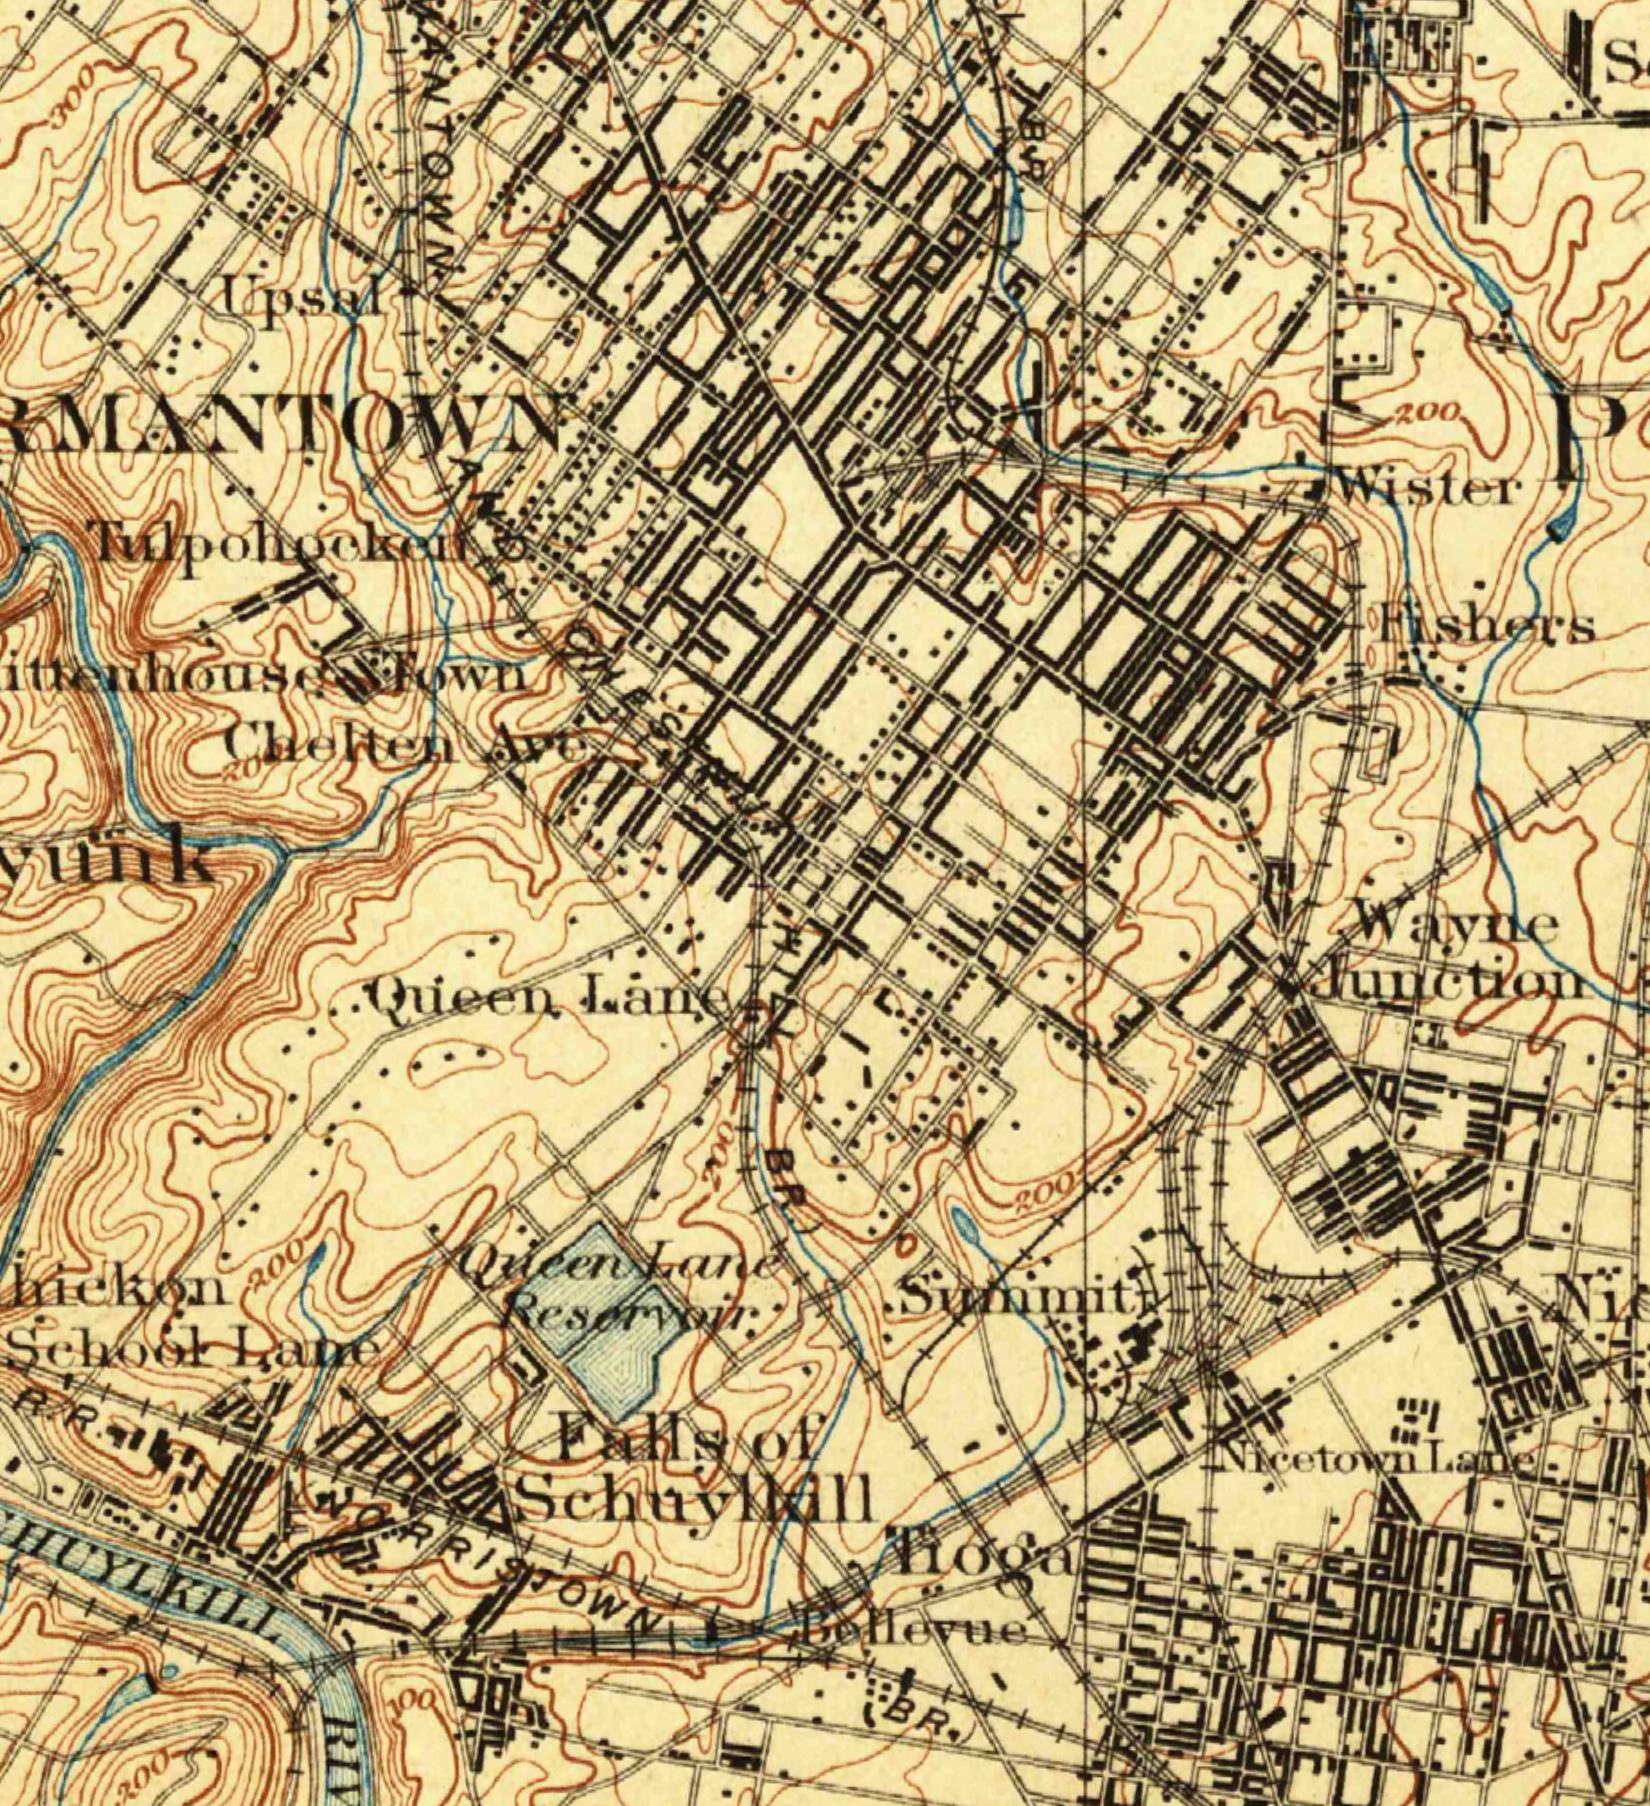 Historical topographic map from 1899